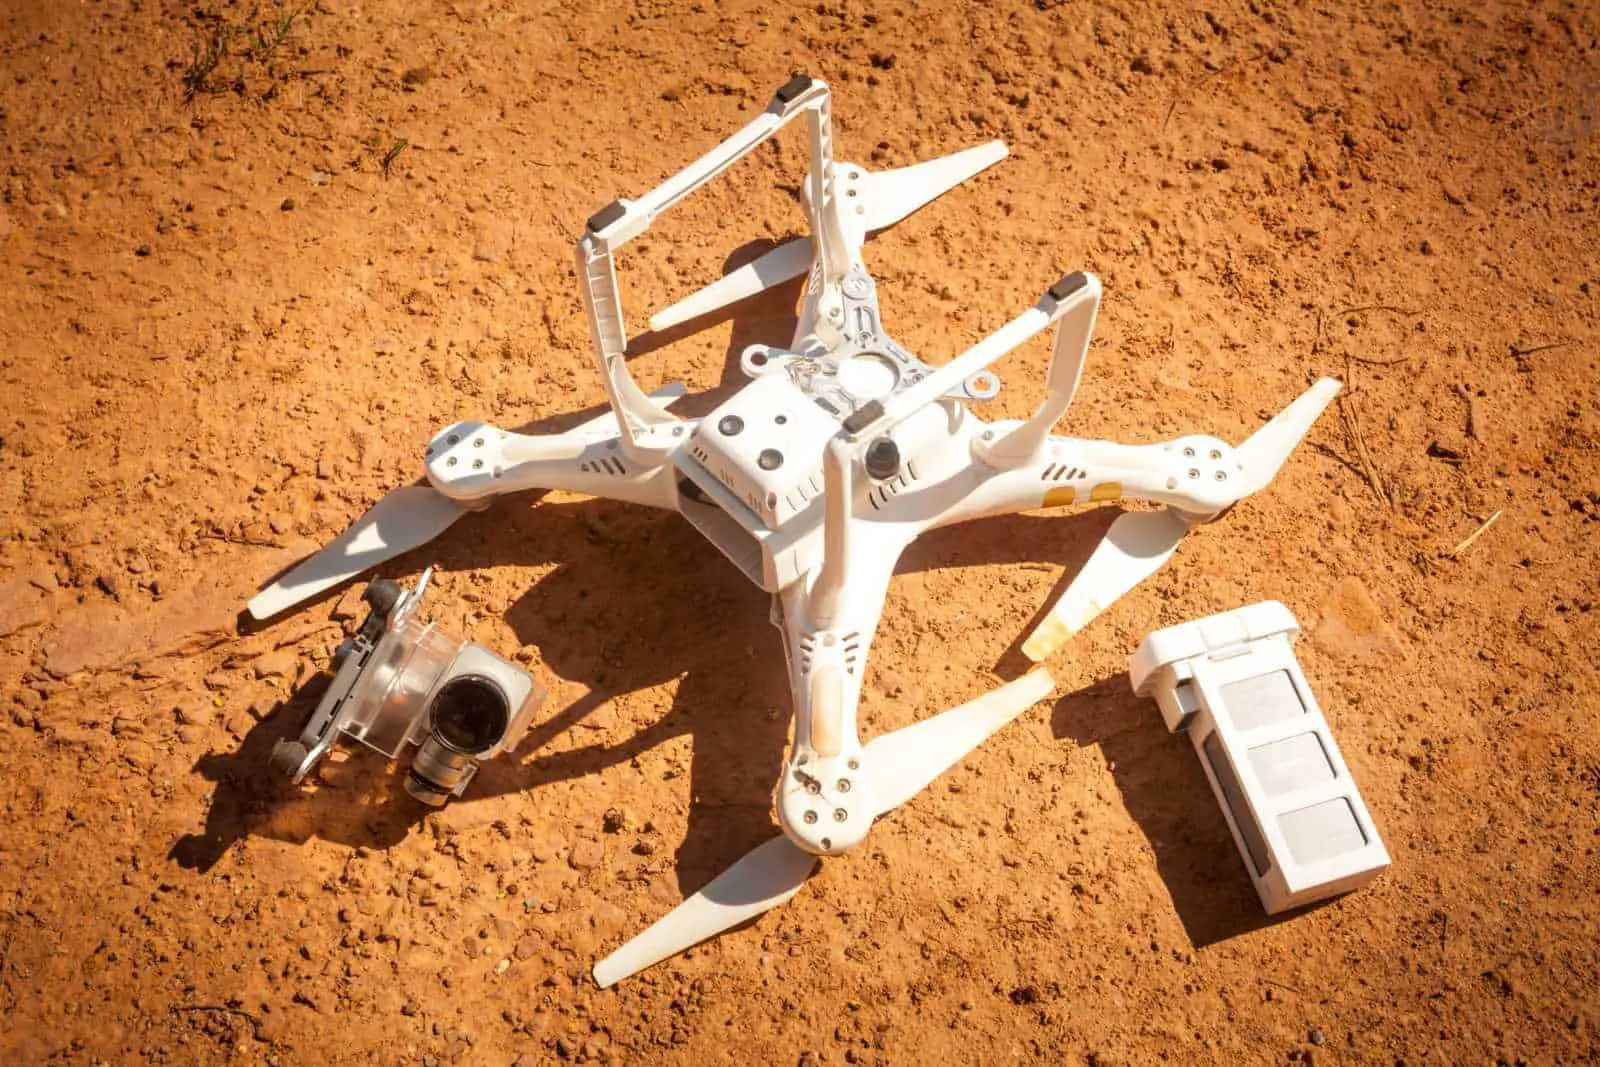 Buy and Sell Broken Drones for Cash